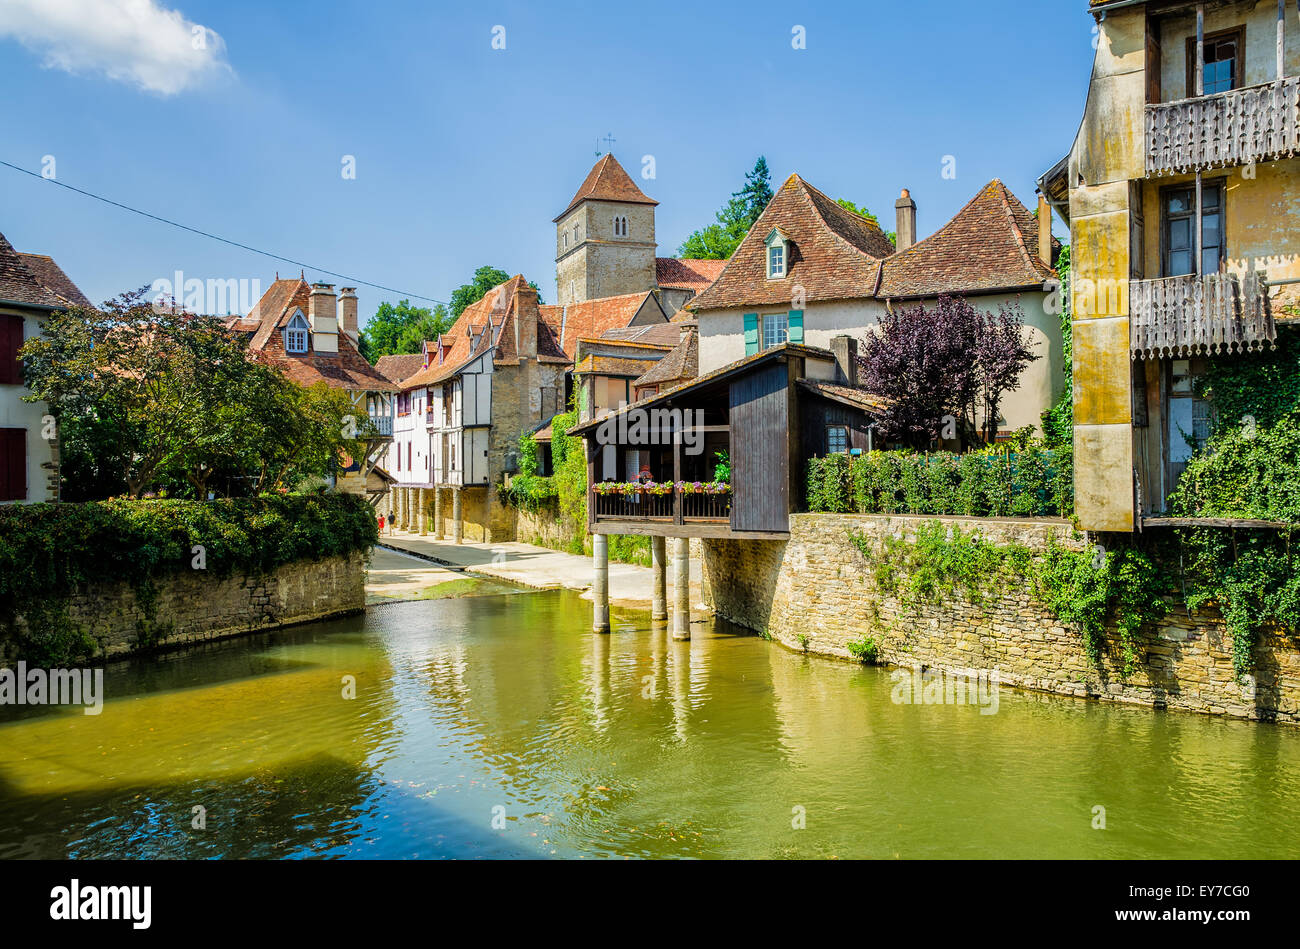 River and buildings in Salies de Bearn, France. Stock Photo